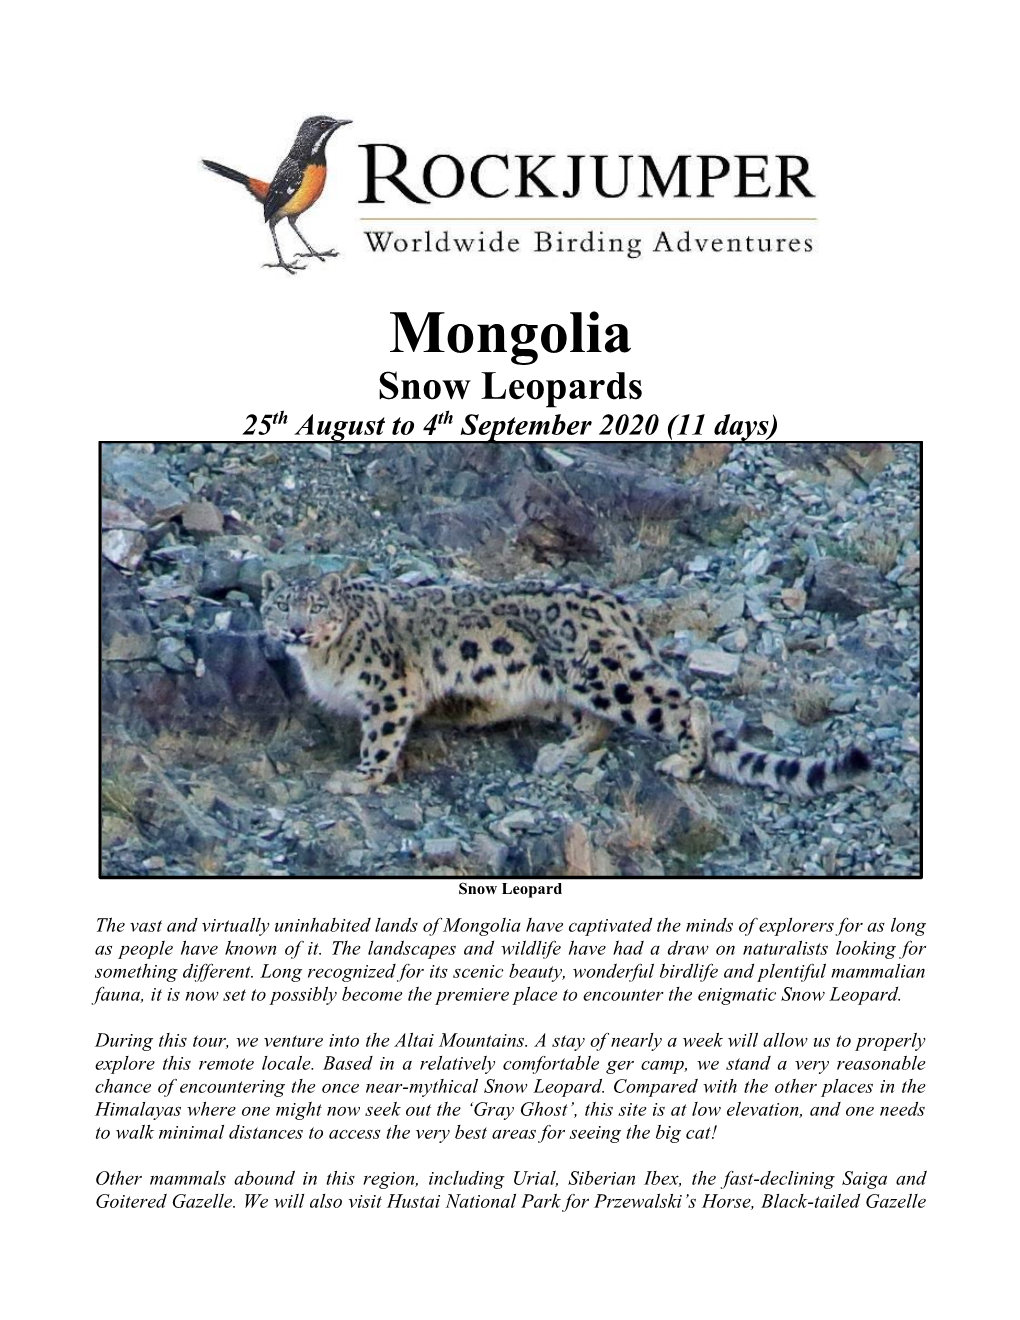 Mongolia Snow Leopards 25Th August to 4Th September 2020 (11 Days)